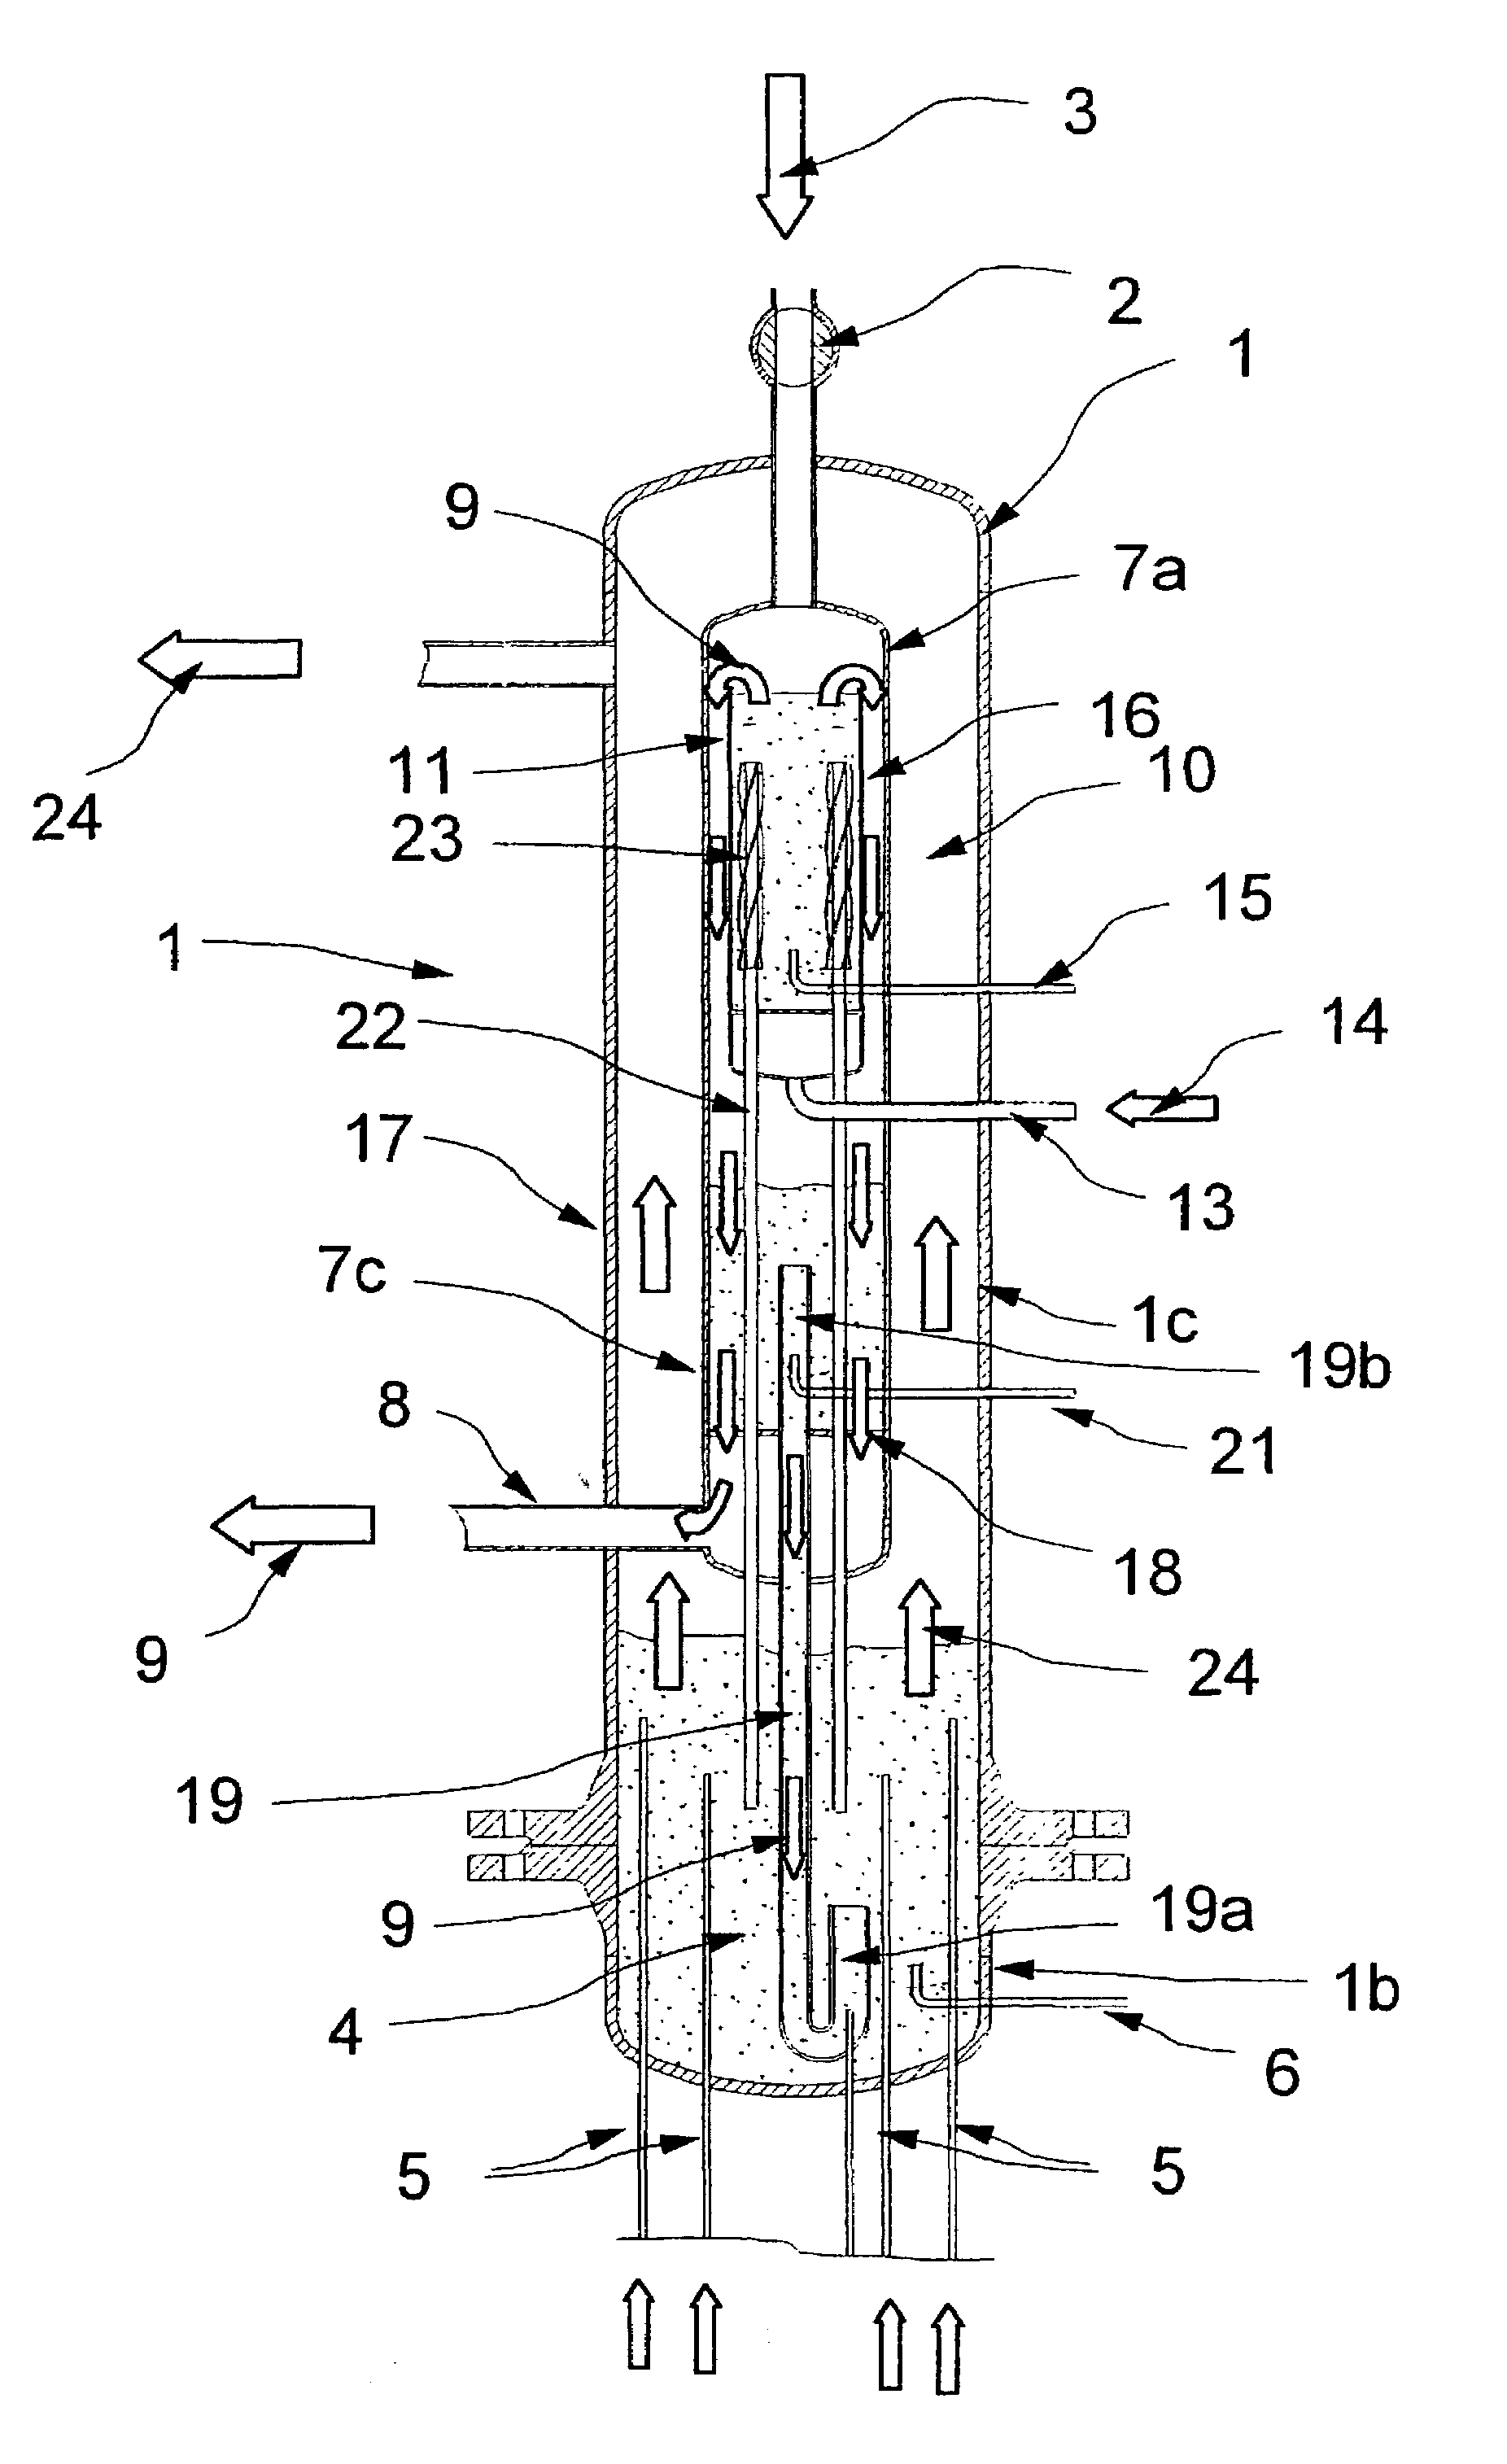 Facility for the gasification of carbon-containing feed materials